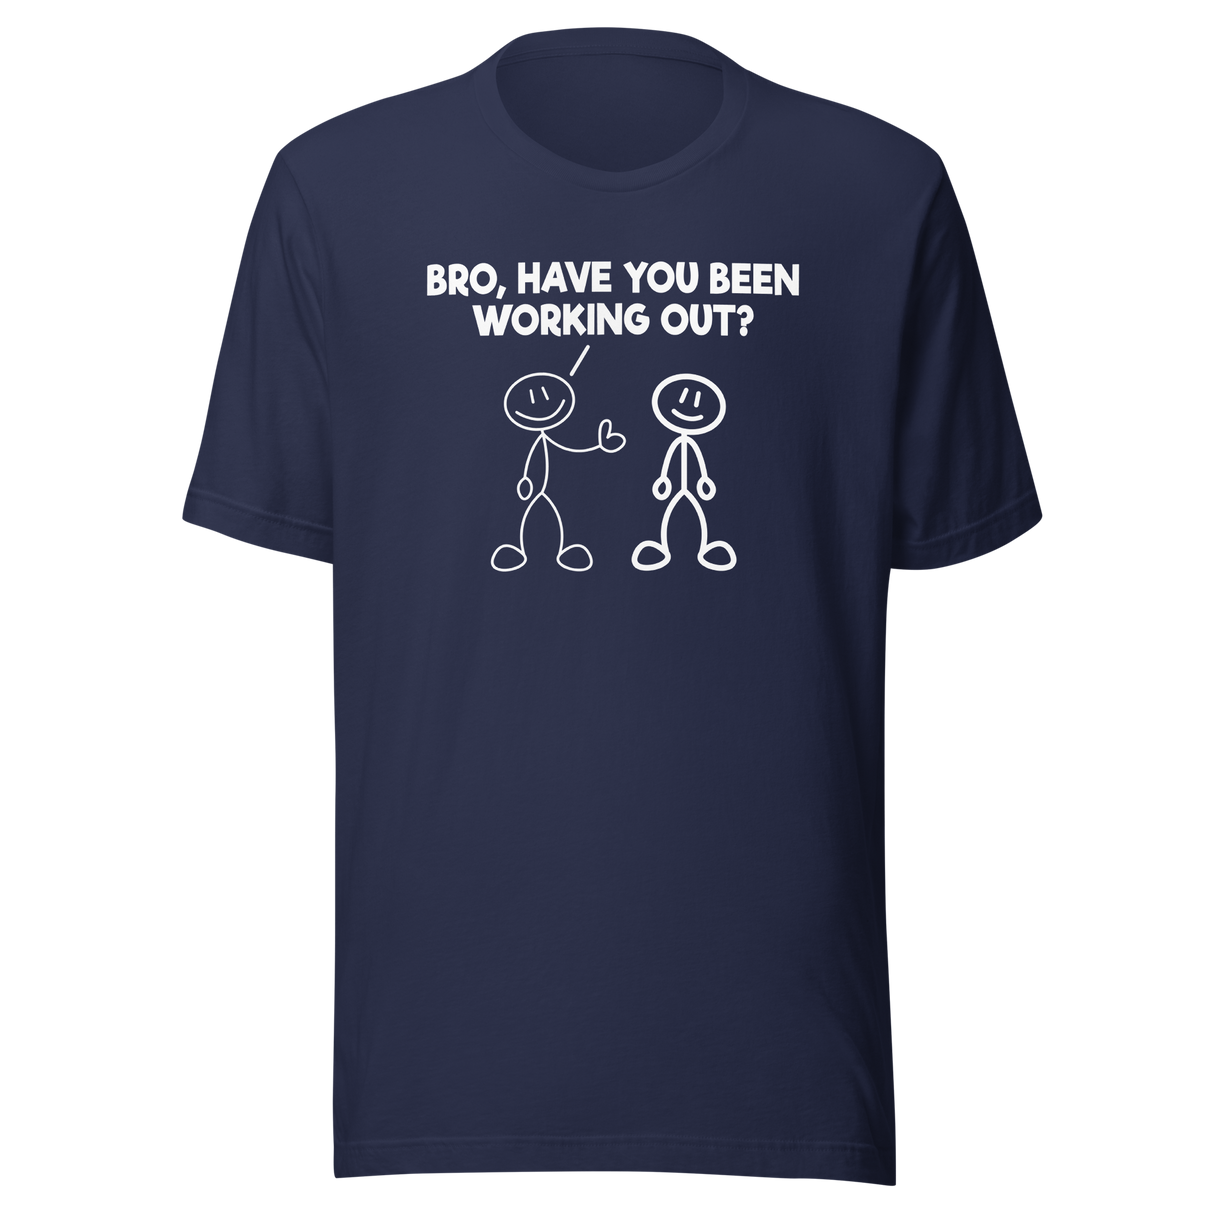 bro-have-you-been-working-out-fitness-tee-funny-t-shirt-muscle-tee-gym-t-shirt-exercise-tee#color_navy